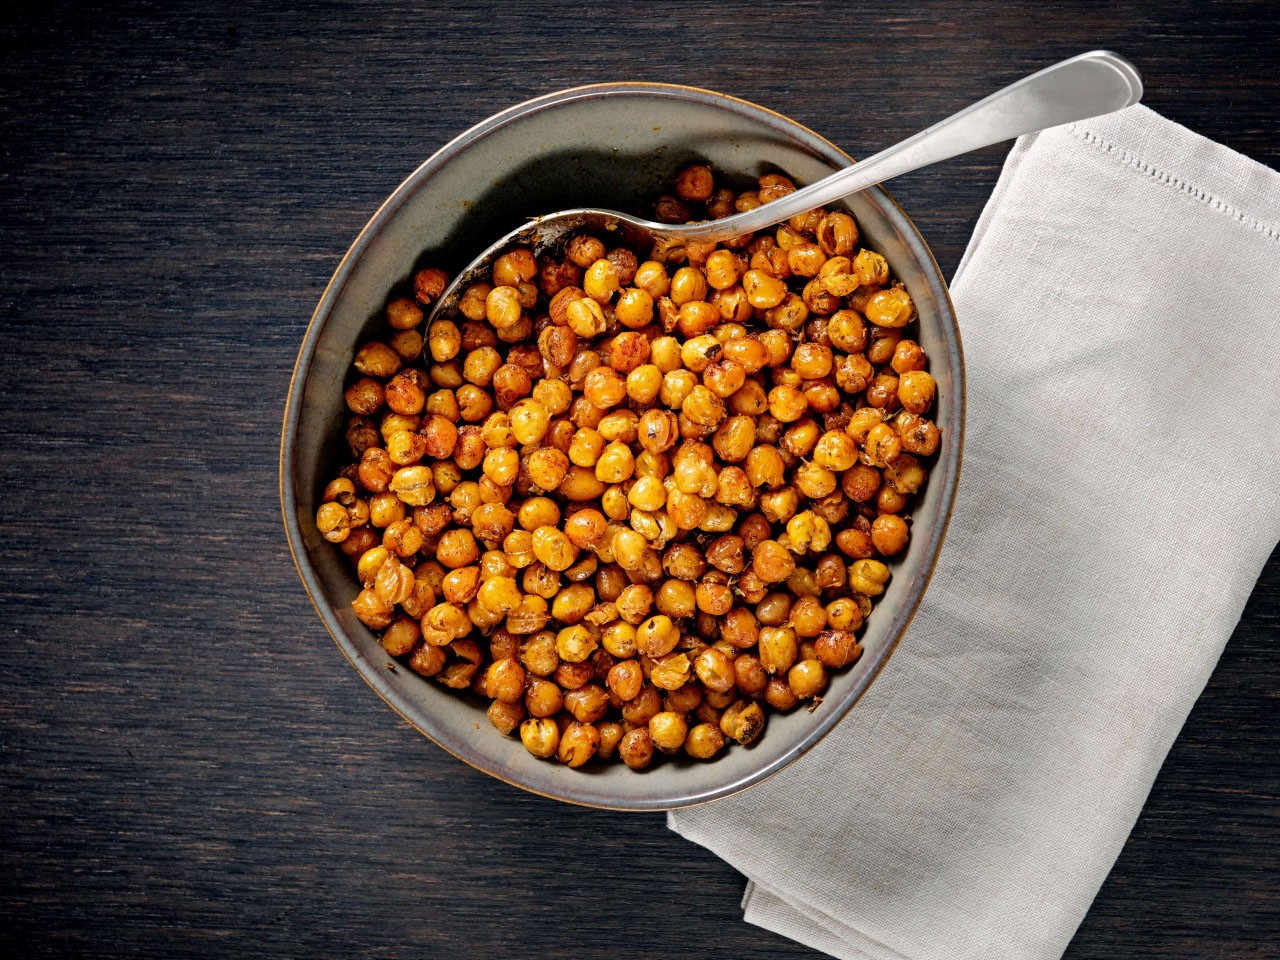 This is an image of some chickpeas.